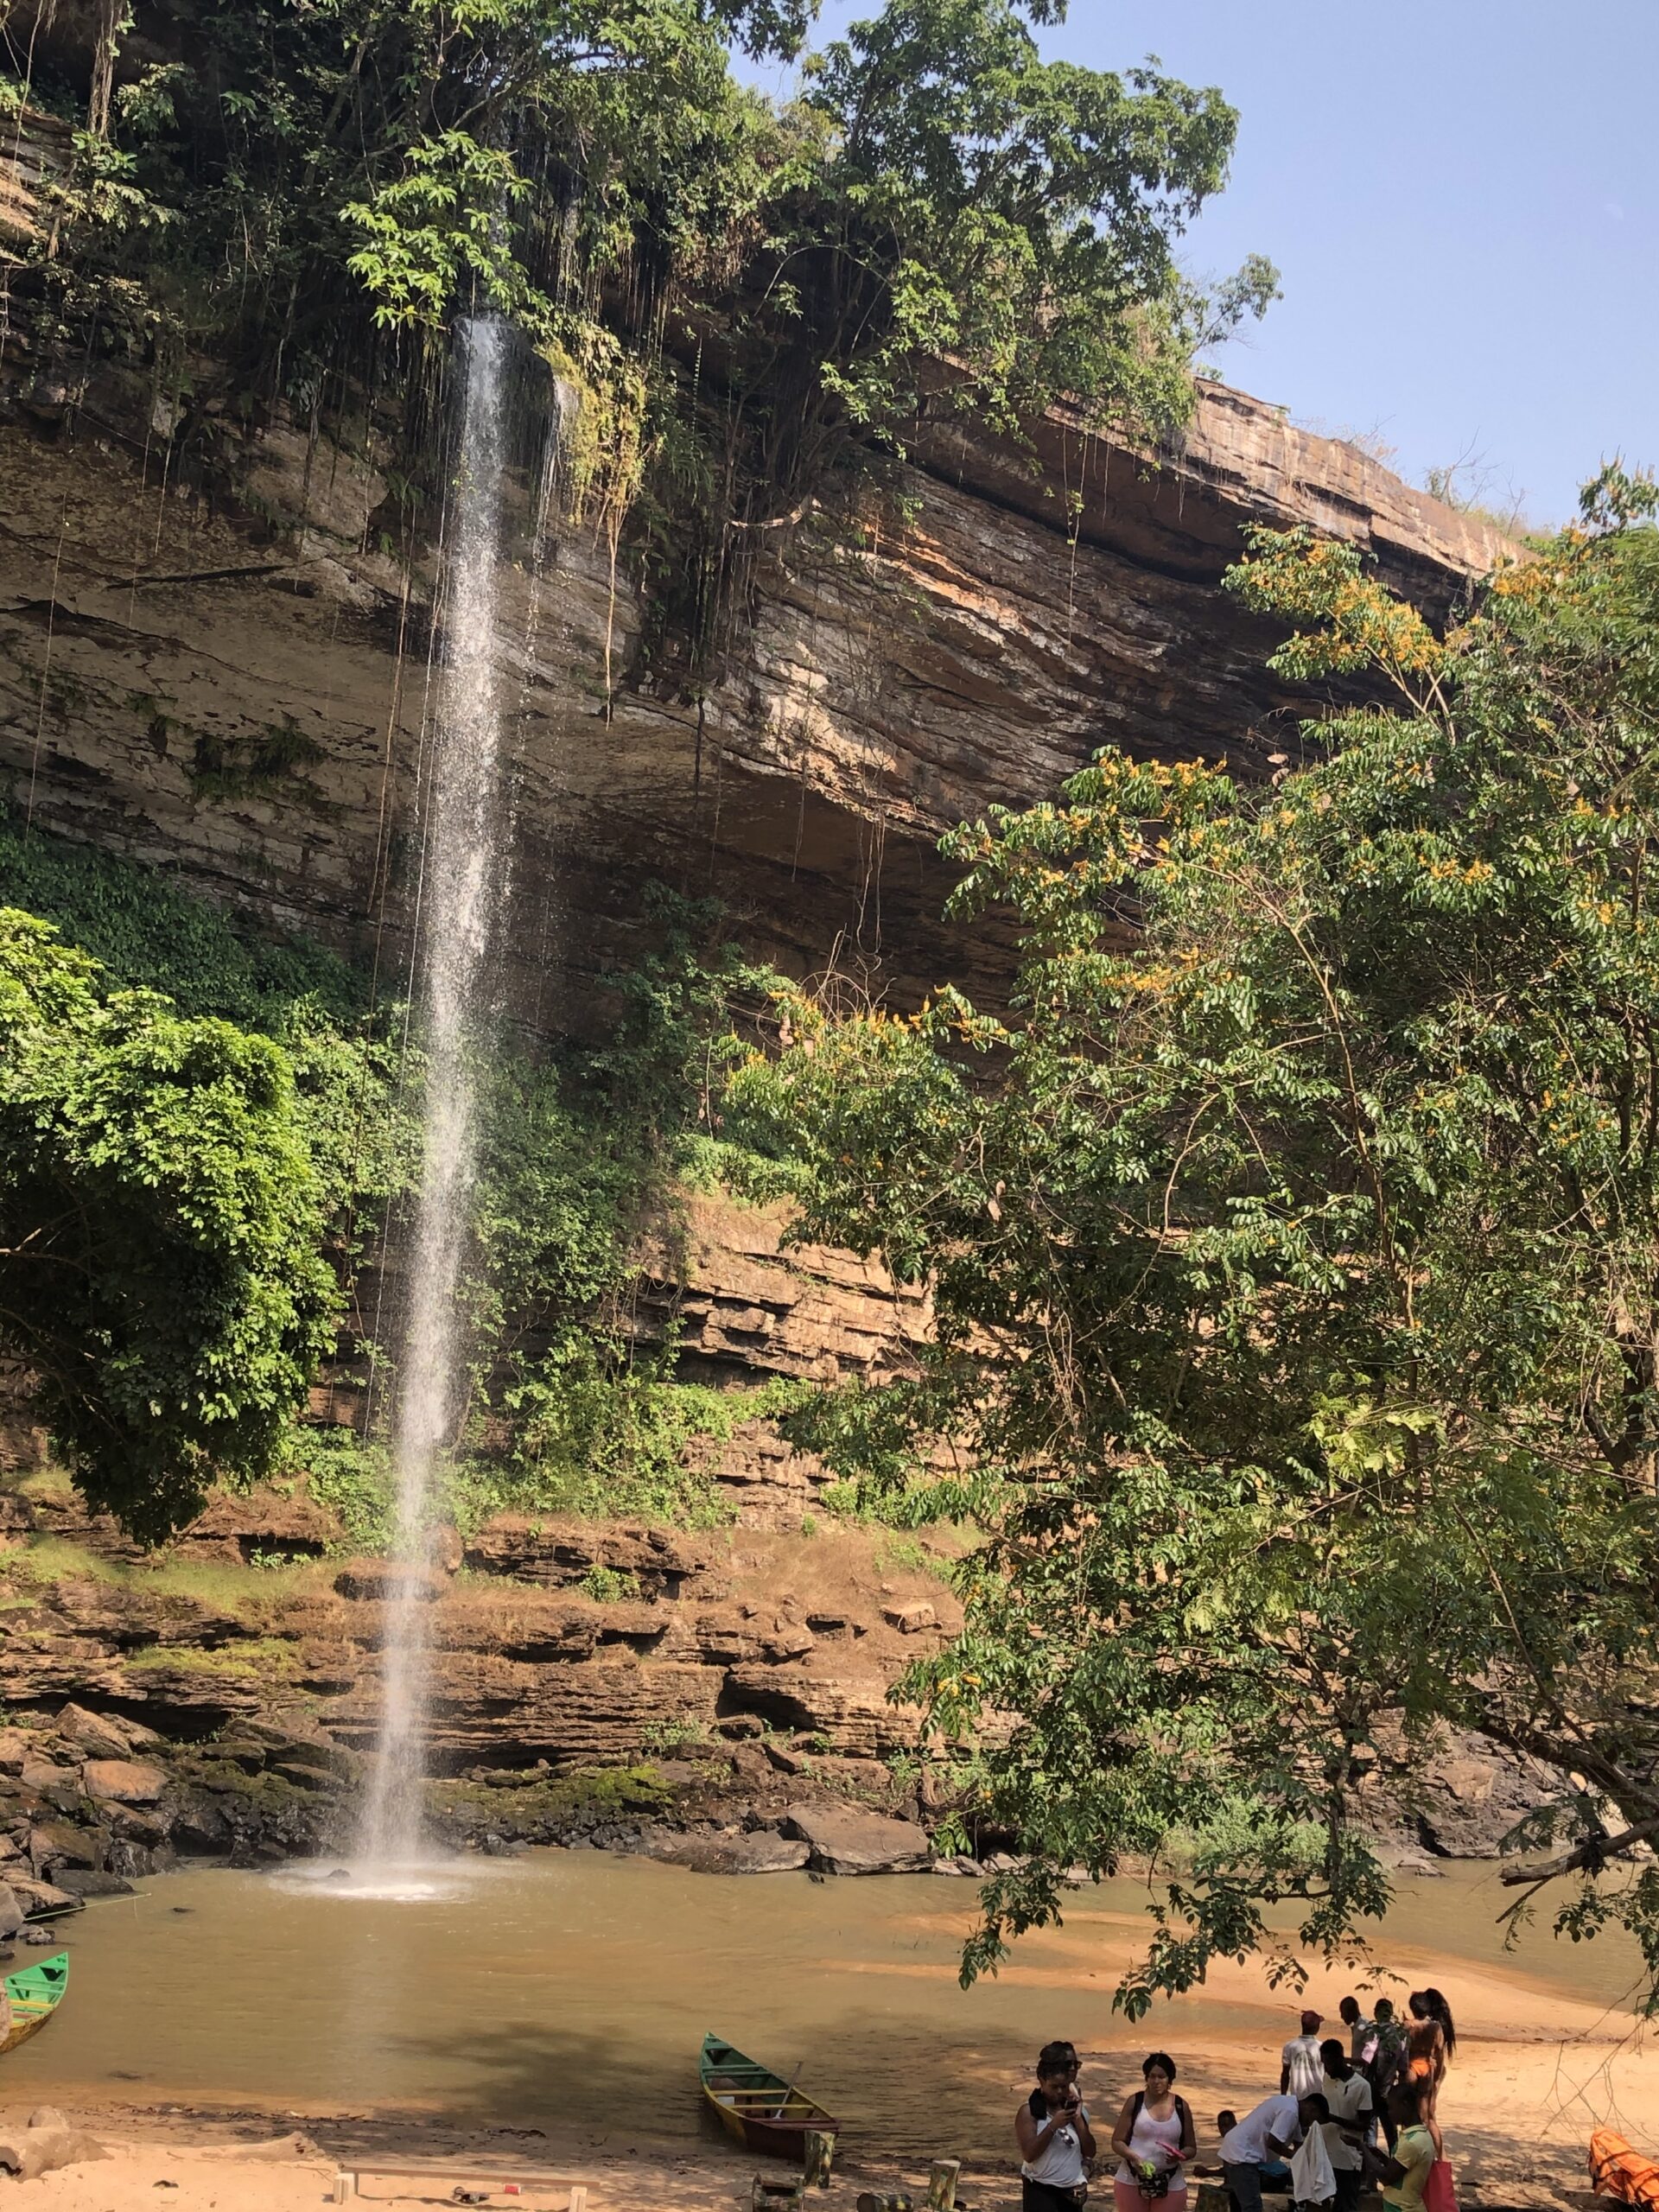 Tall waterfalls at Boti Falls that causes a small ravine. Small green canoe at the bottom with lots of Black visitors at the bank of the ravine.